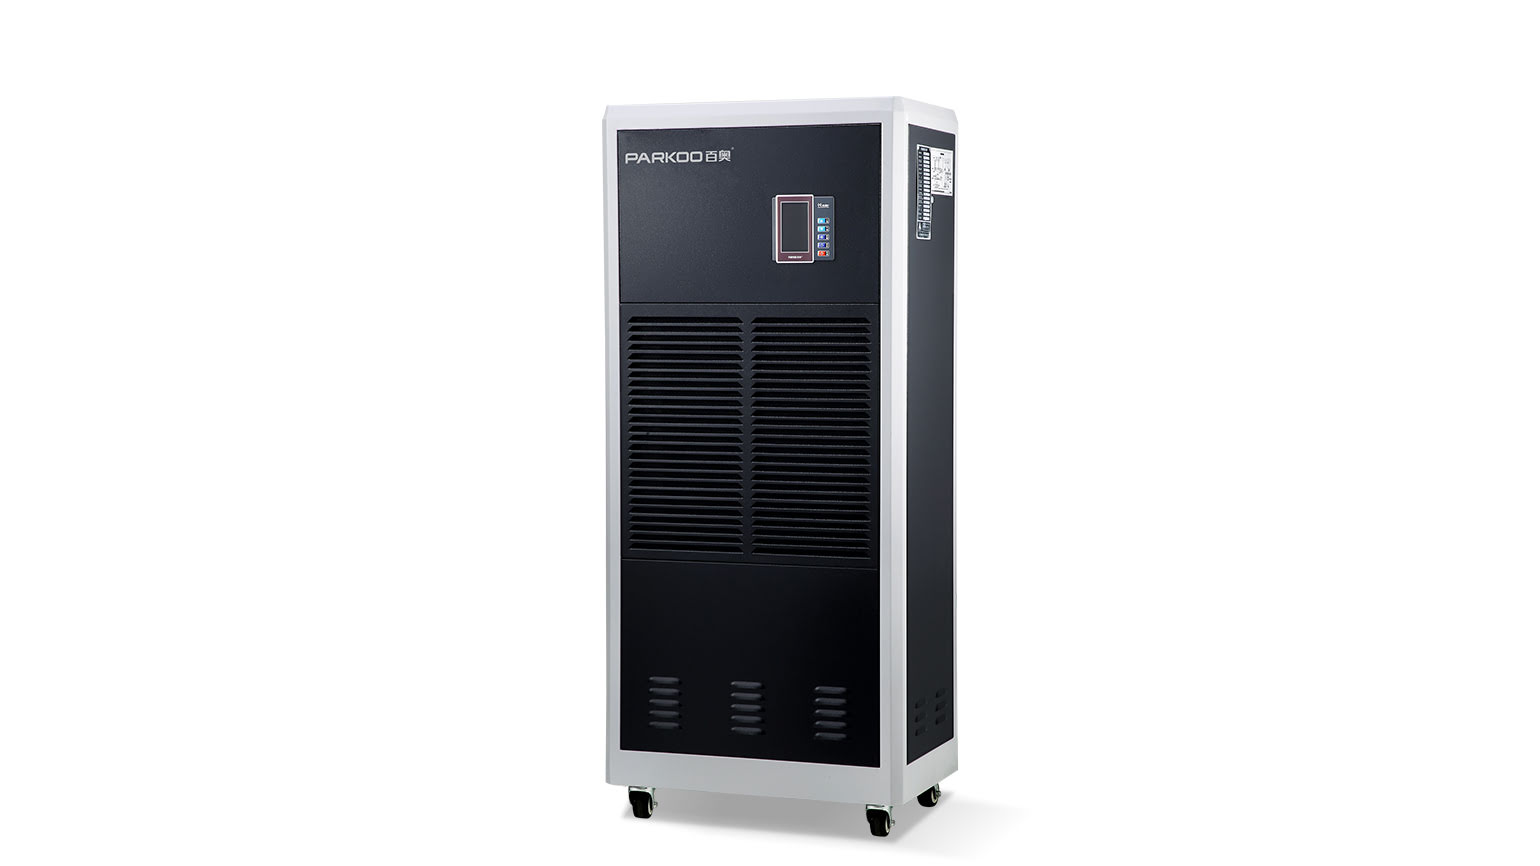 Industrial dehumidifiers help supermarkets reduce operating costs by preserving freshness and dehumidification